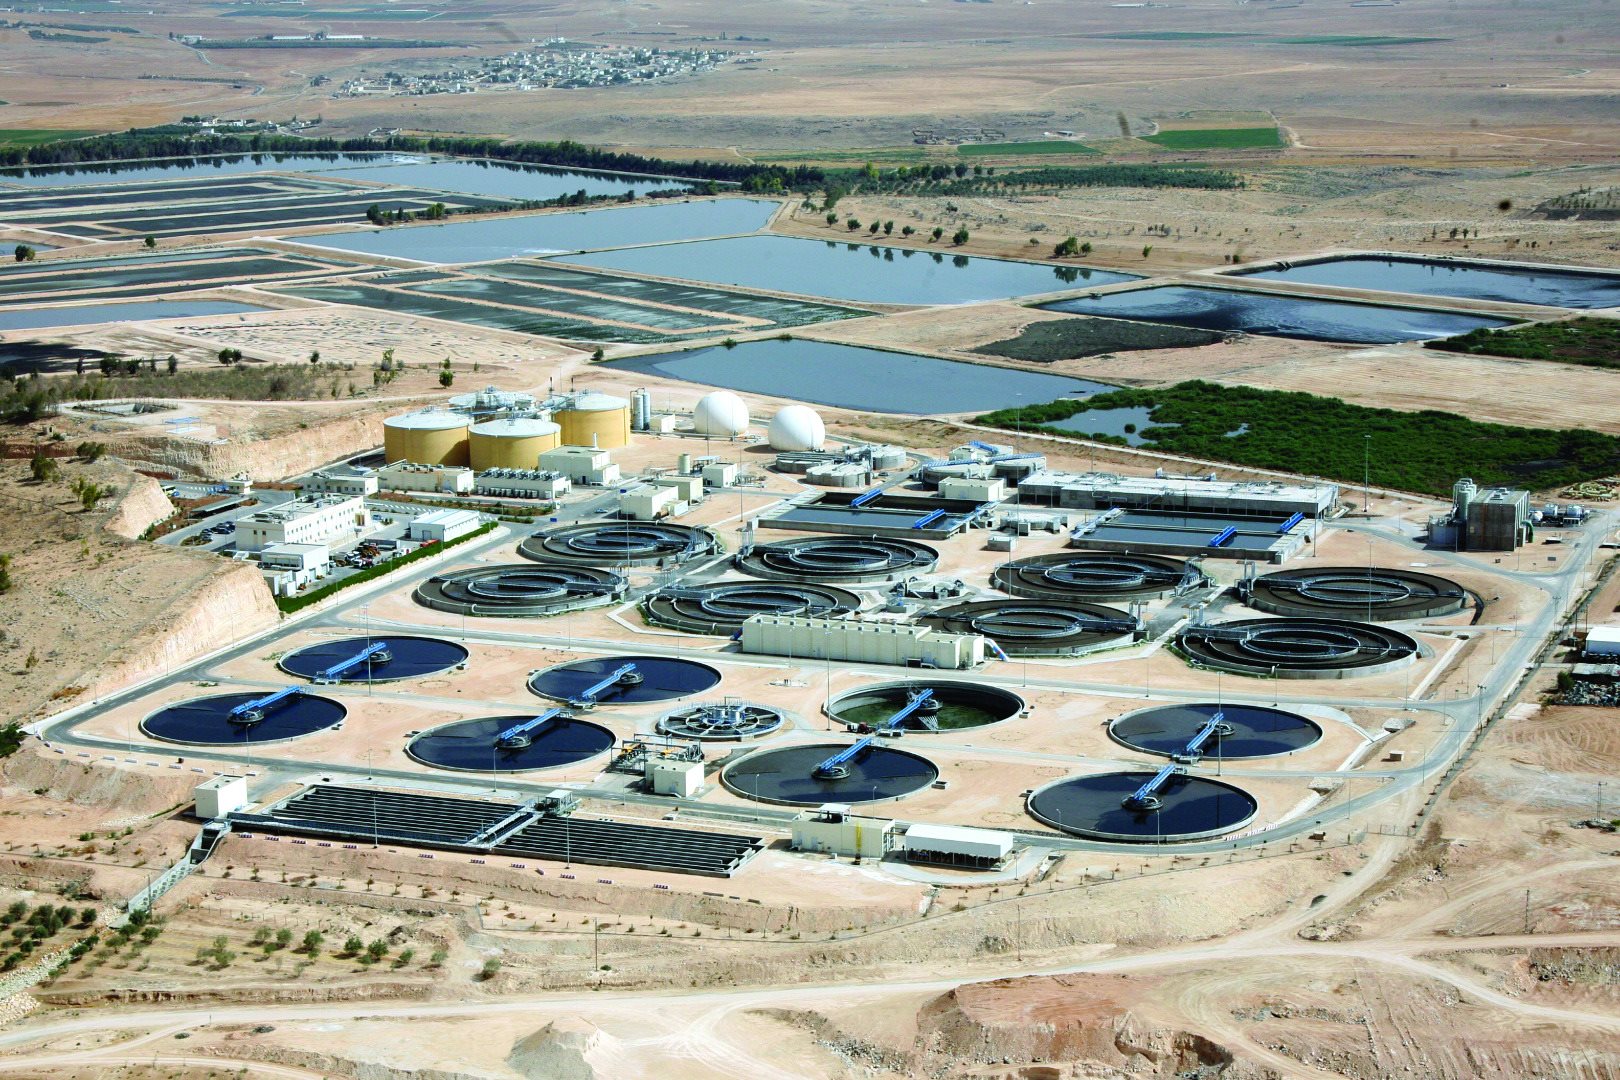 Arial view of the wastewater treatment plant